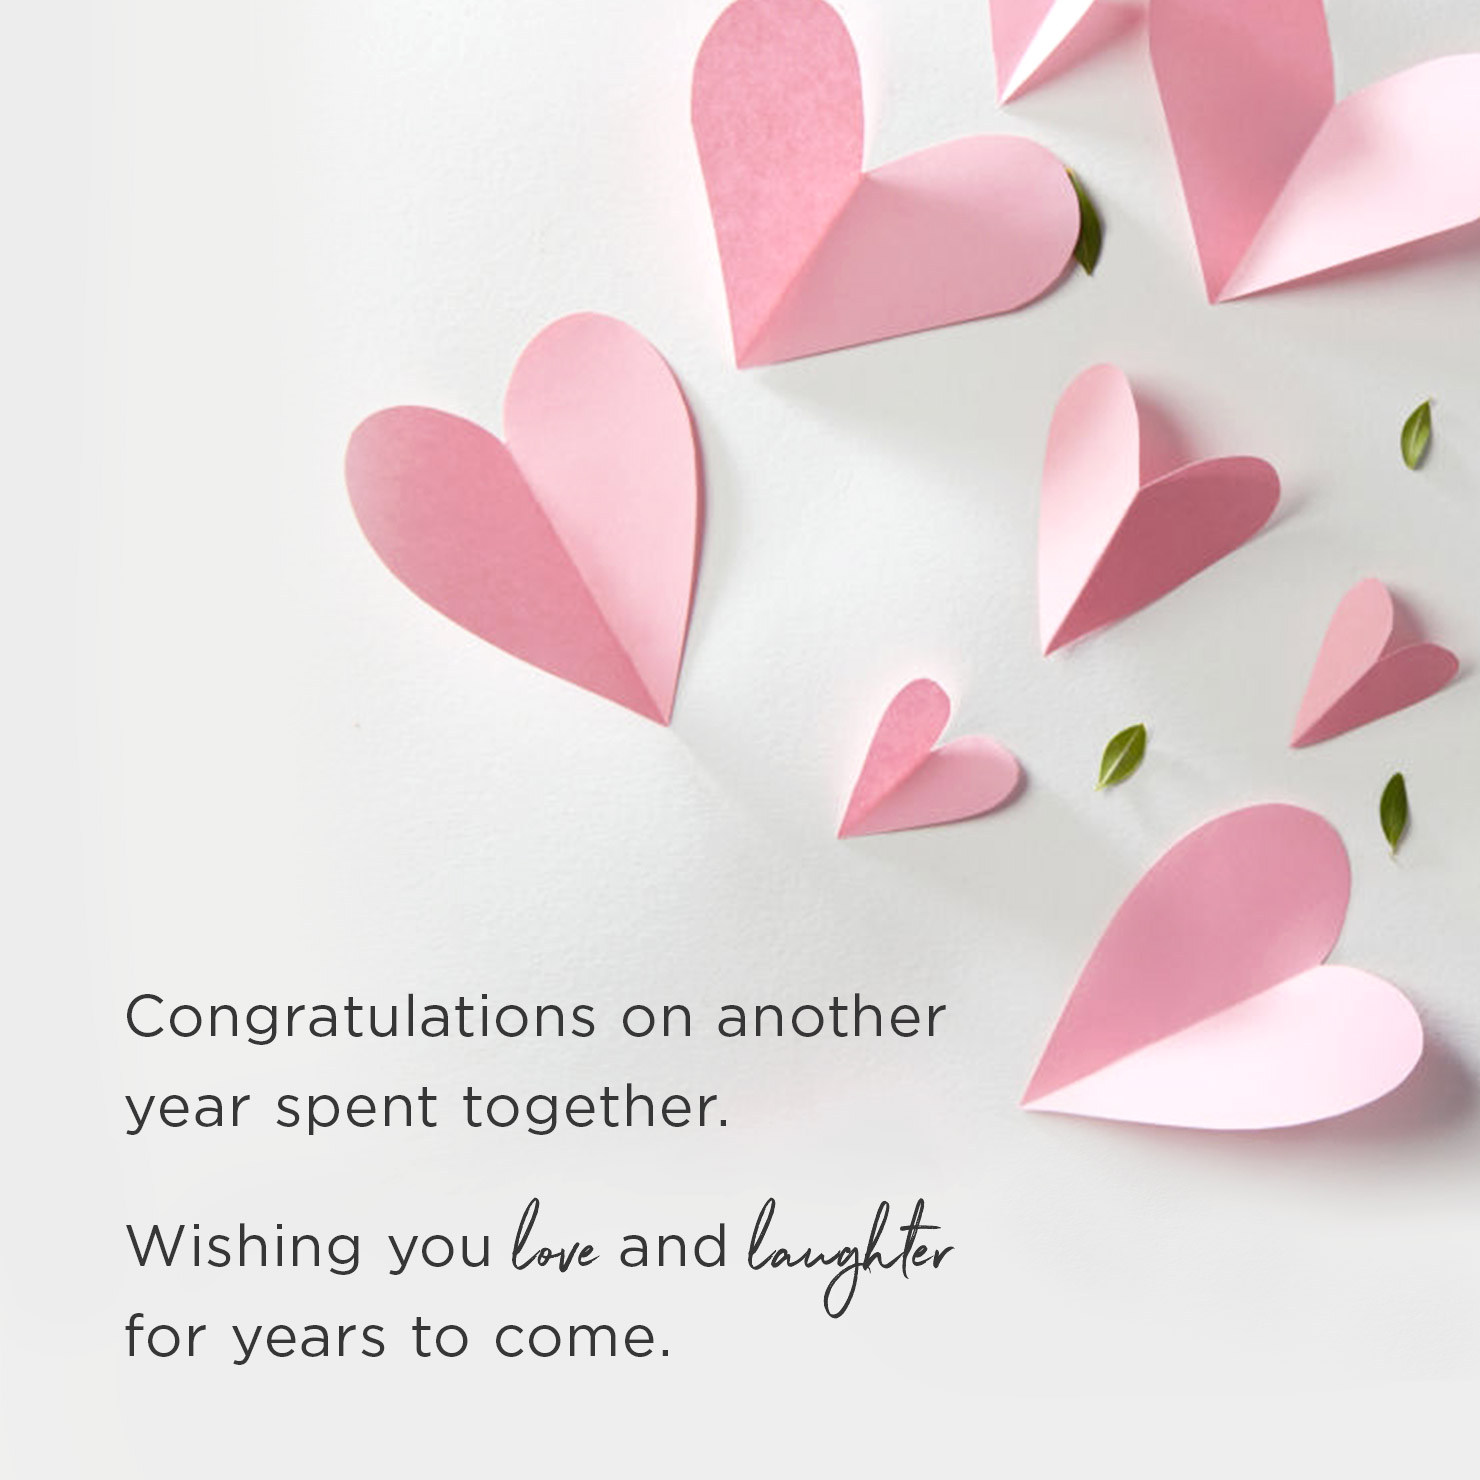 80 Heartfelt Happy Anniversary Messages With Images Shutterfly